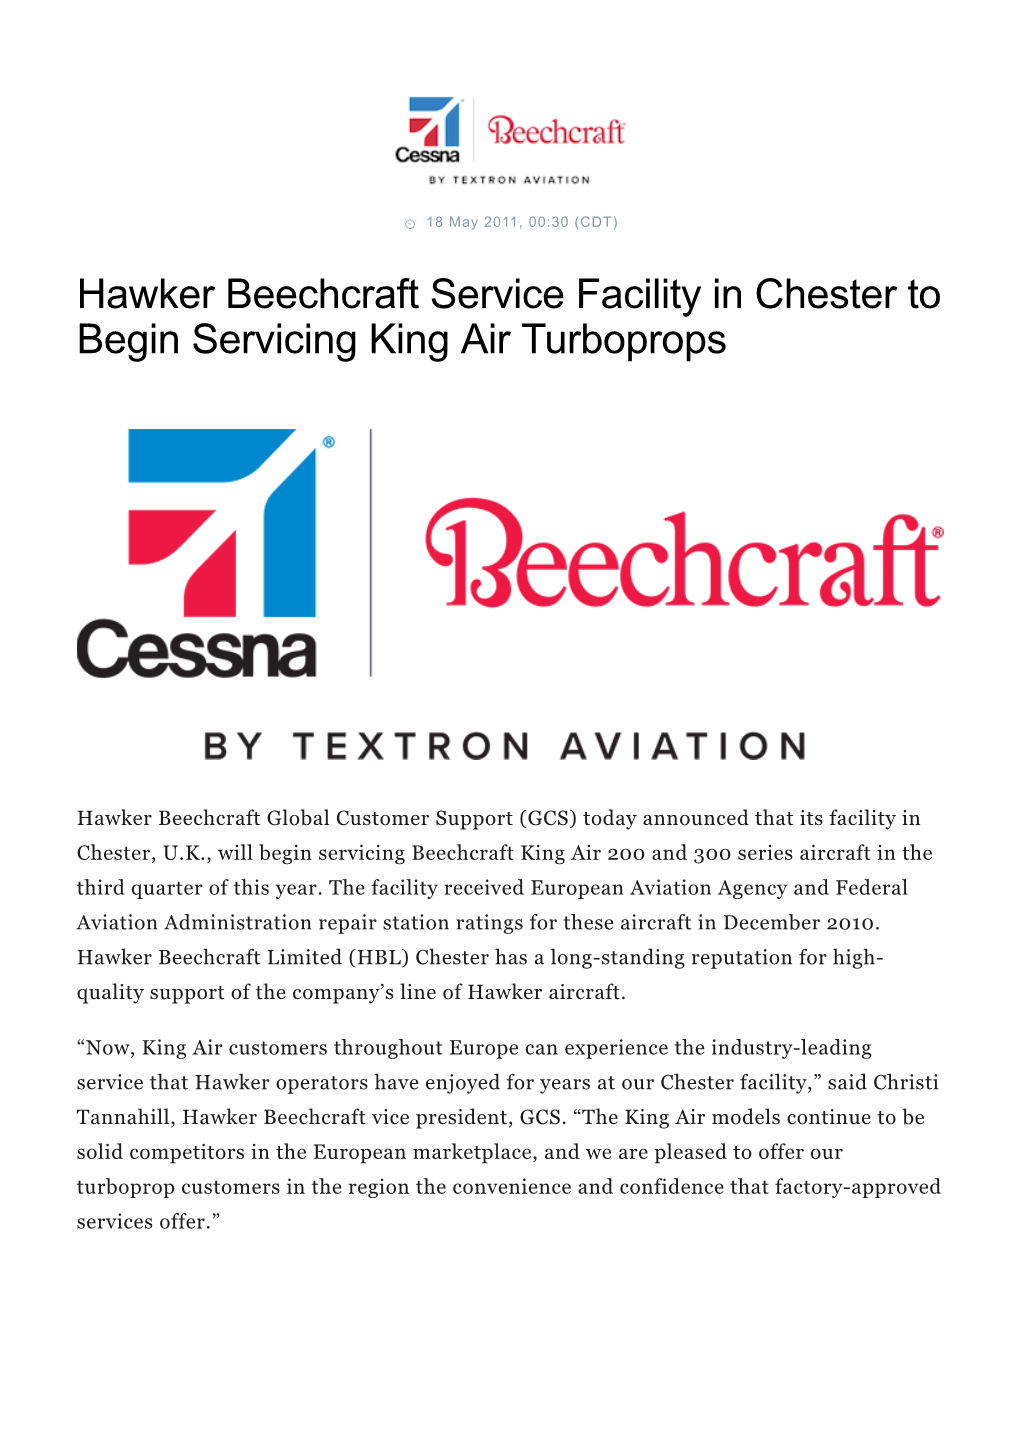 Hawker Beechcraft Service Facility in Chester to Begin Servicing King Air Turboprops